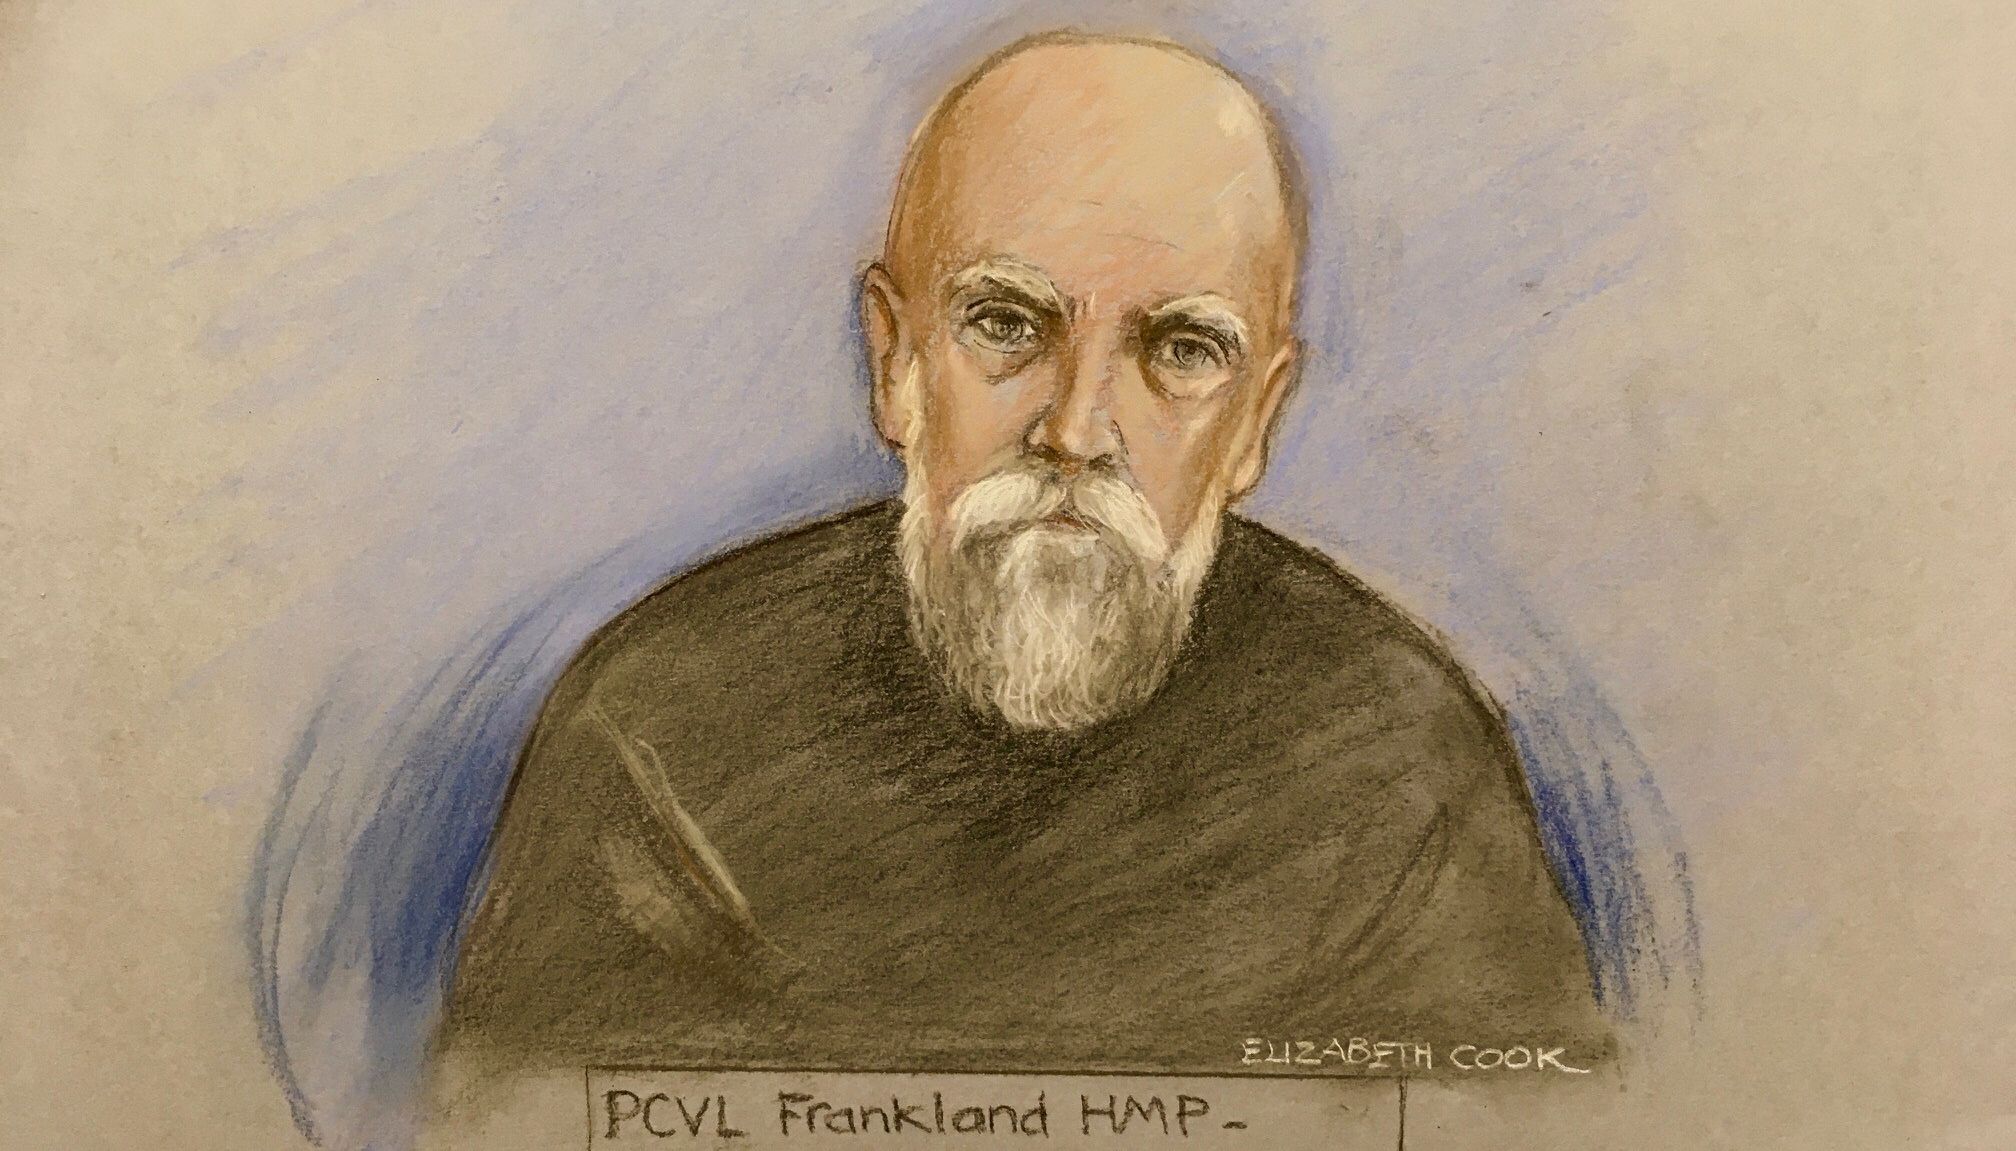 Court artist sketch by Elizabeth Cook of Wayne Couzens appearing via video link at Westminster Magistrates' Court, London, where he is charged with four offences of indecent exposure, which allegedly took place between January and February 2021. Picture date: Wednesday April 13, 2022.